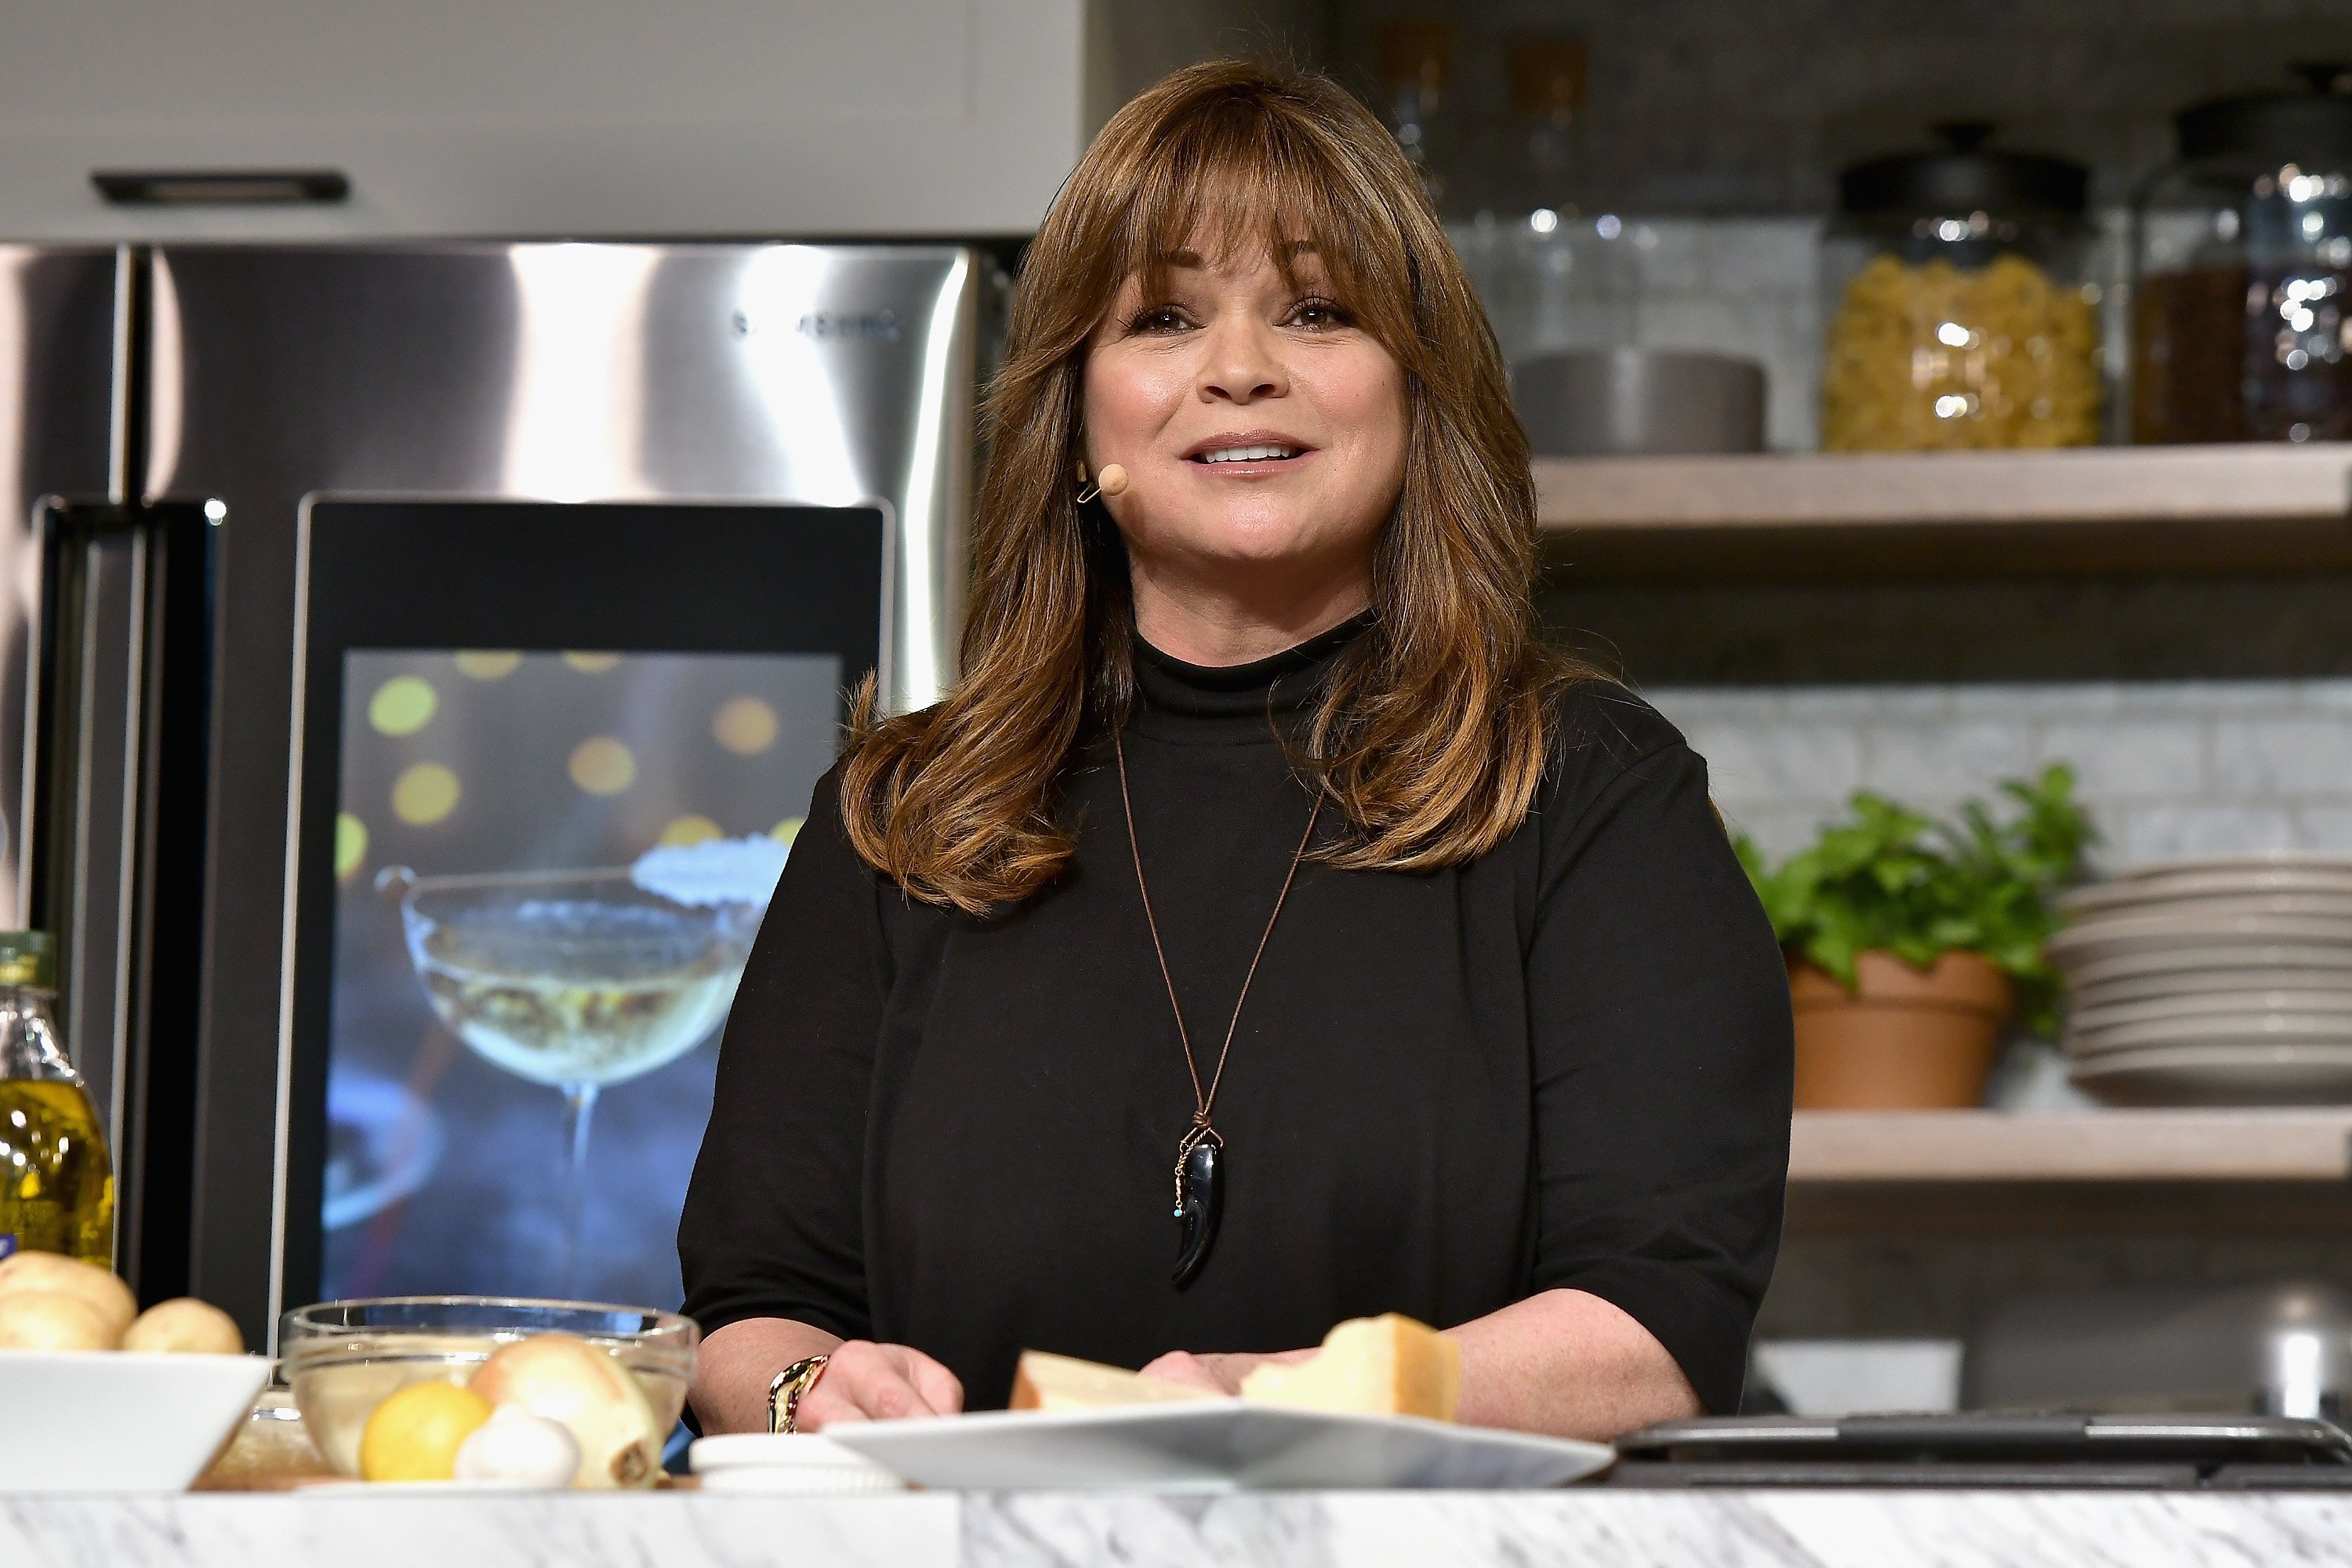 Television personality Valerie Bertinelli prepares a dish at a 2017 Food Network event